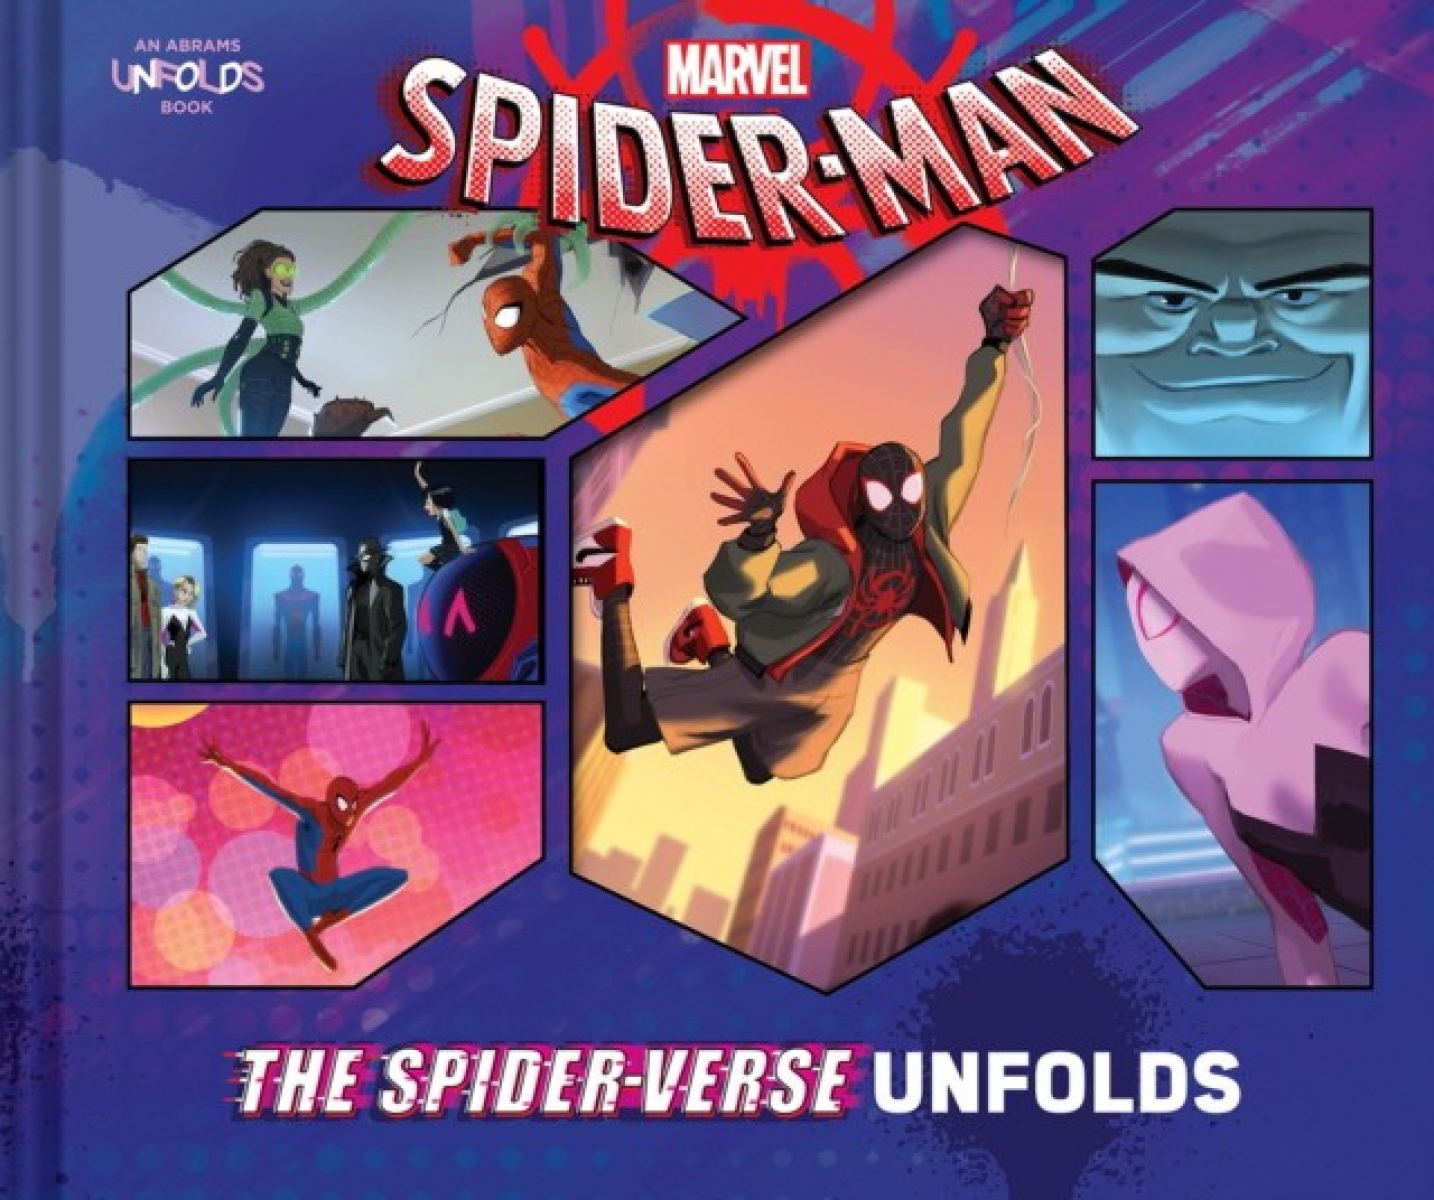 Marvel Entertainment, illustrated by Mingjue Chen Spider-Man: The Spider-Verse Unfolds 